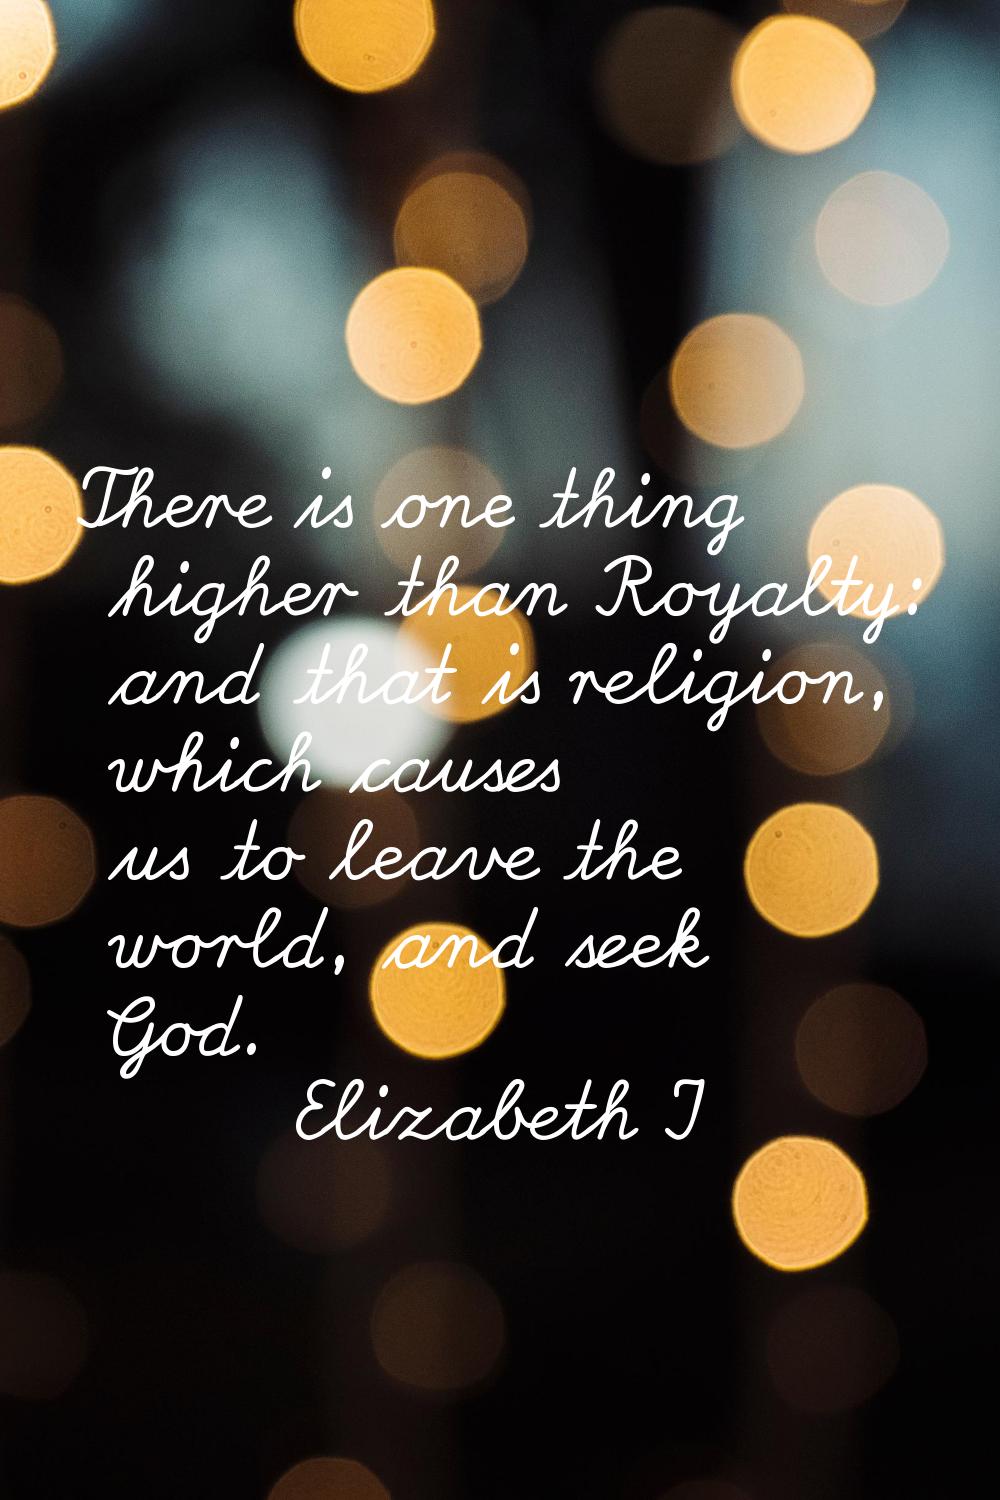 There is one thing higher than Royalty: and that is religion, which causes us to leave the world, a